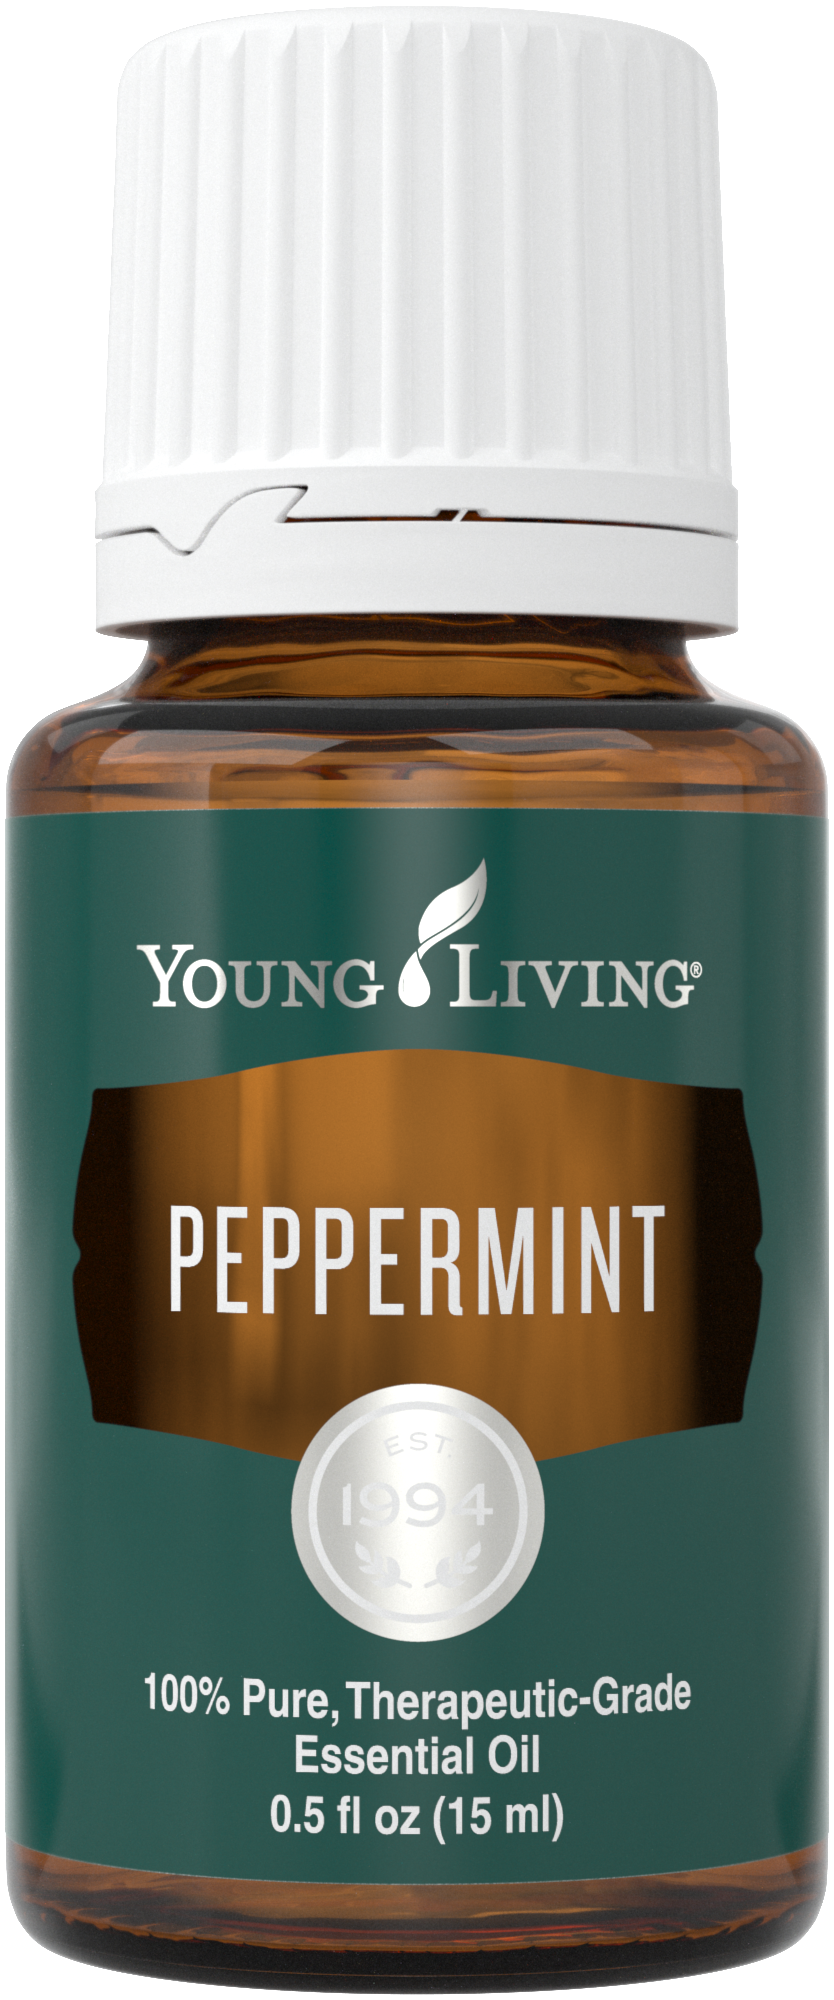 Peppermint 15ml Silo.png